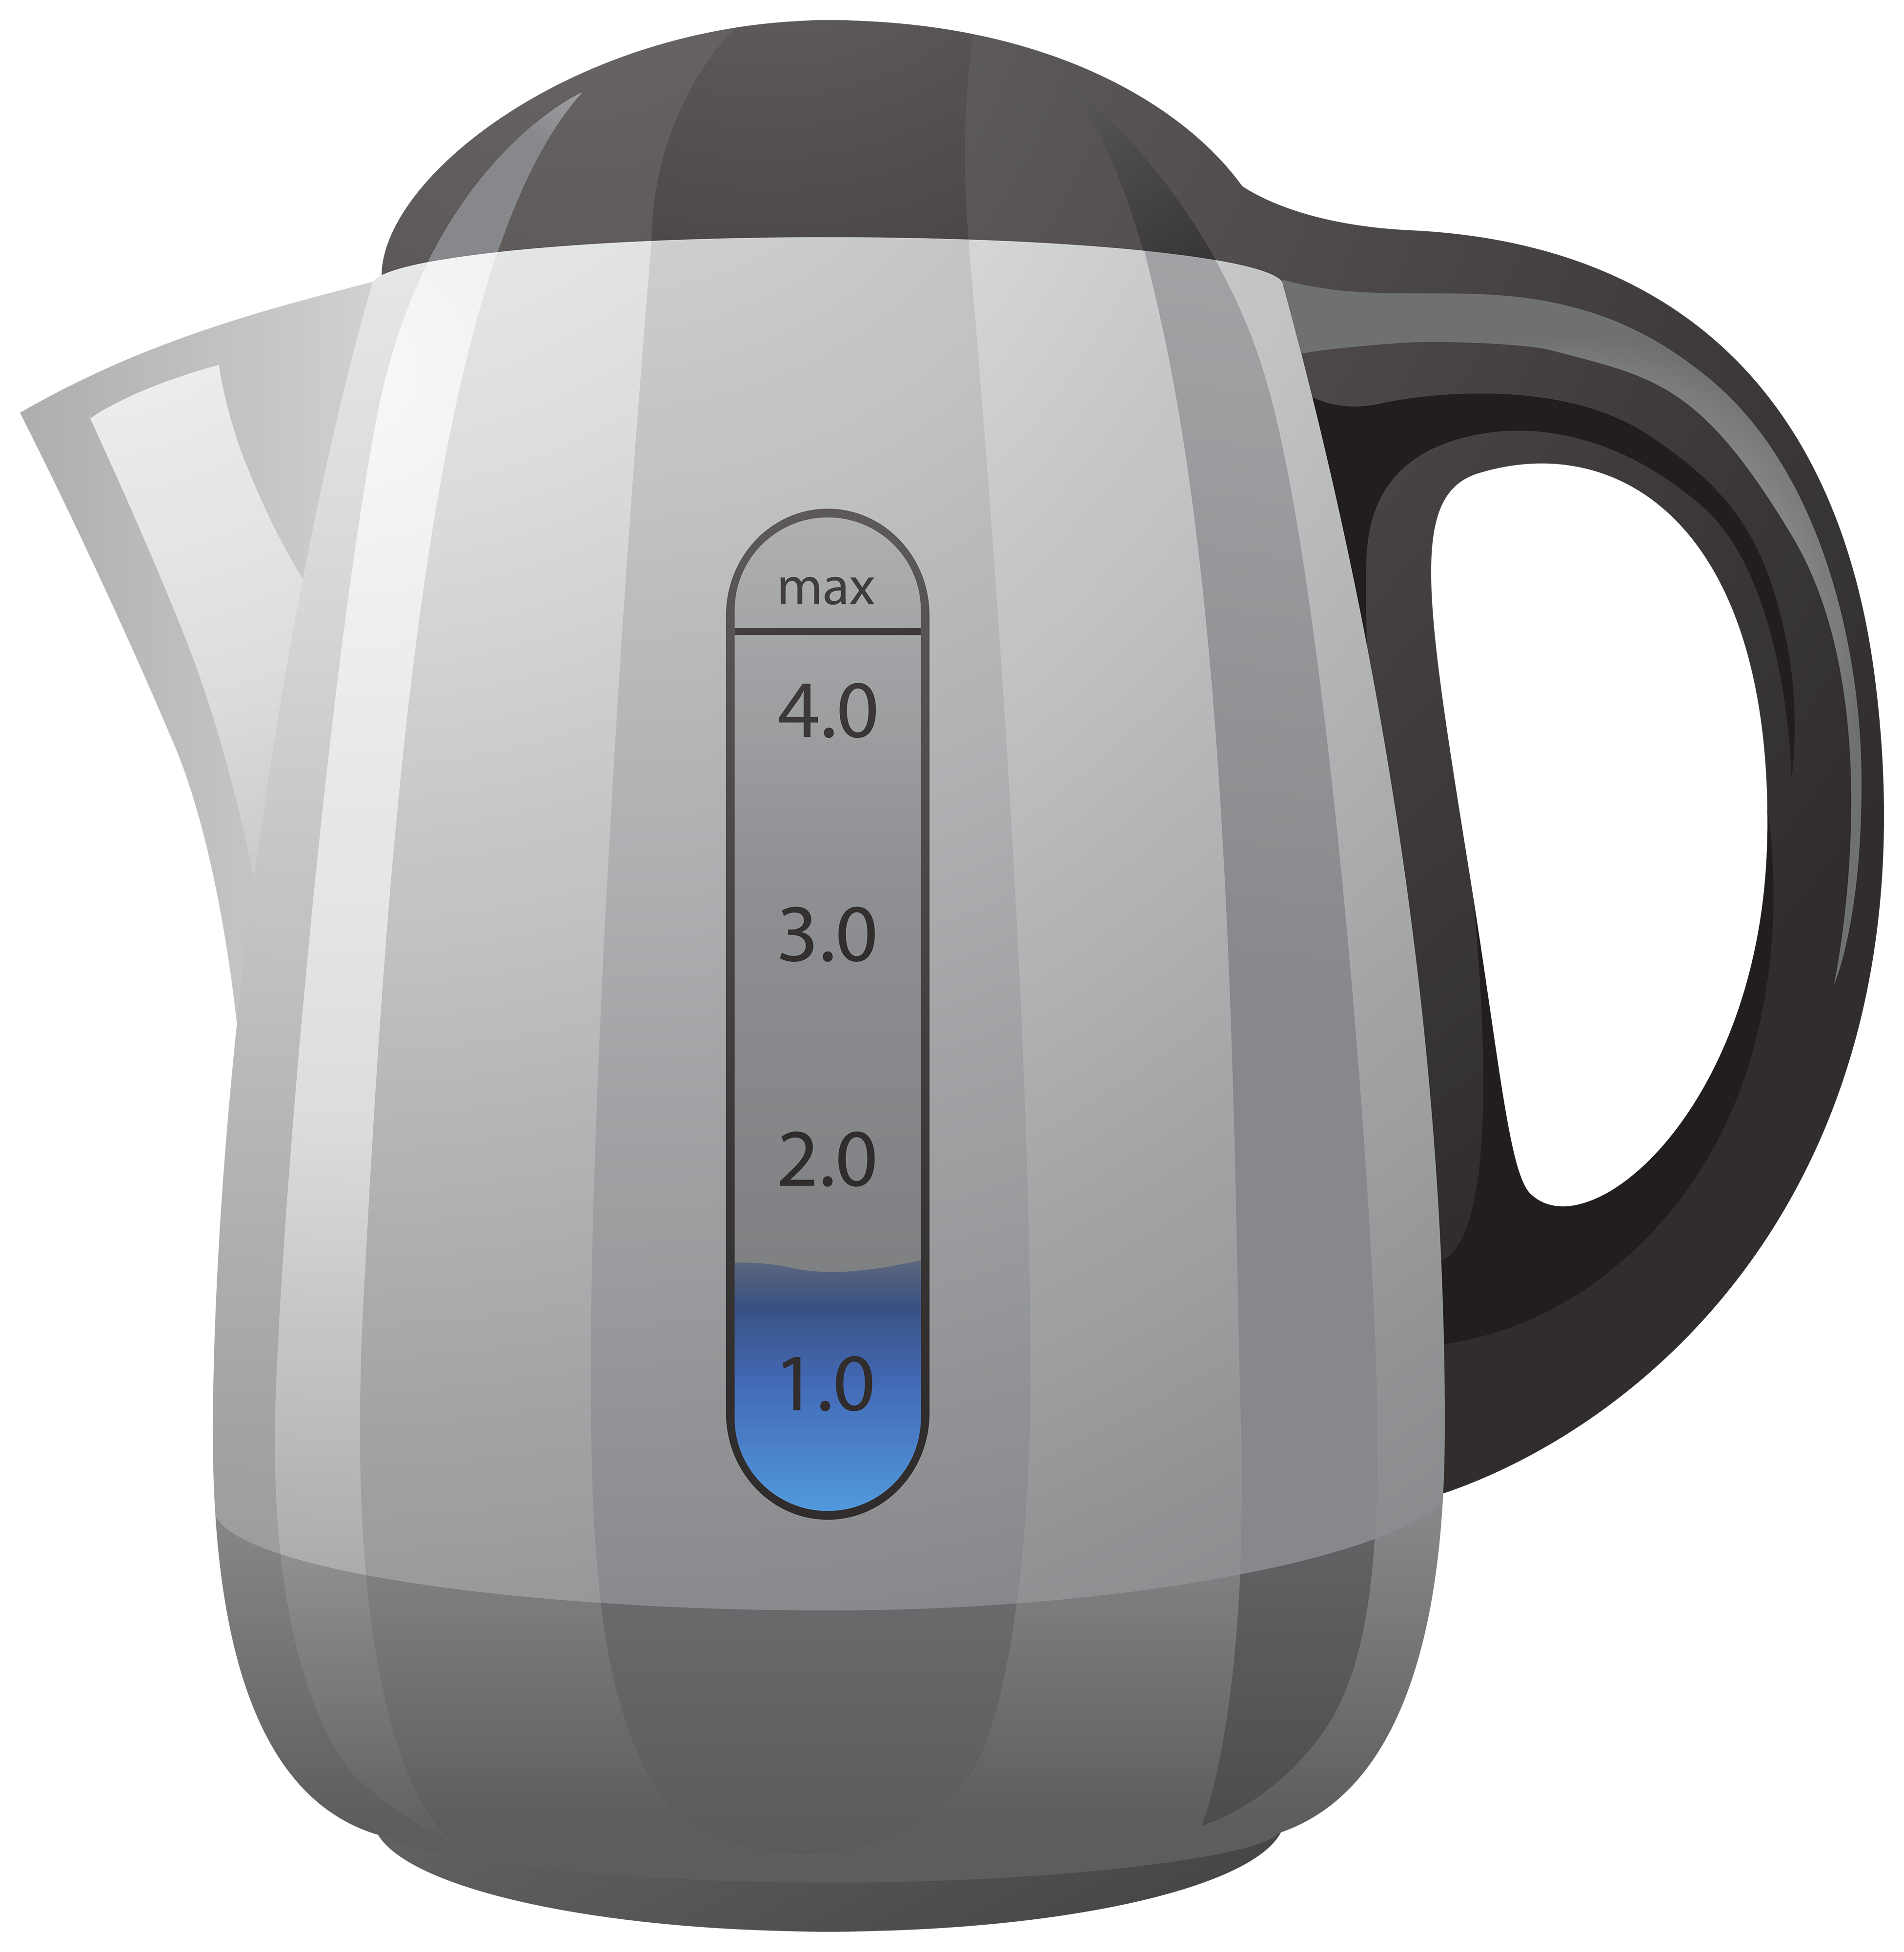 clipart of kettle - photo #11